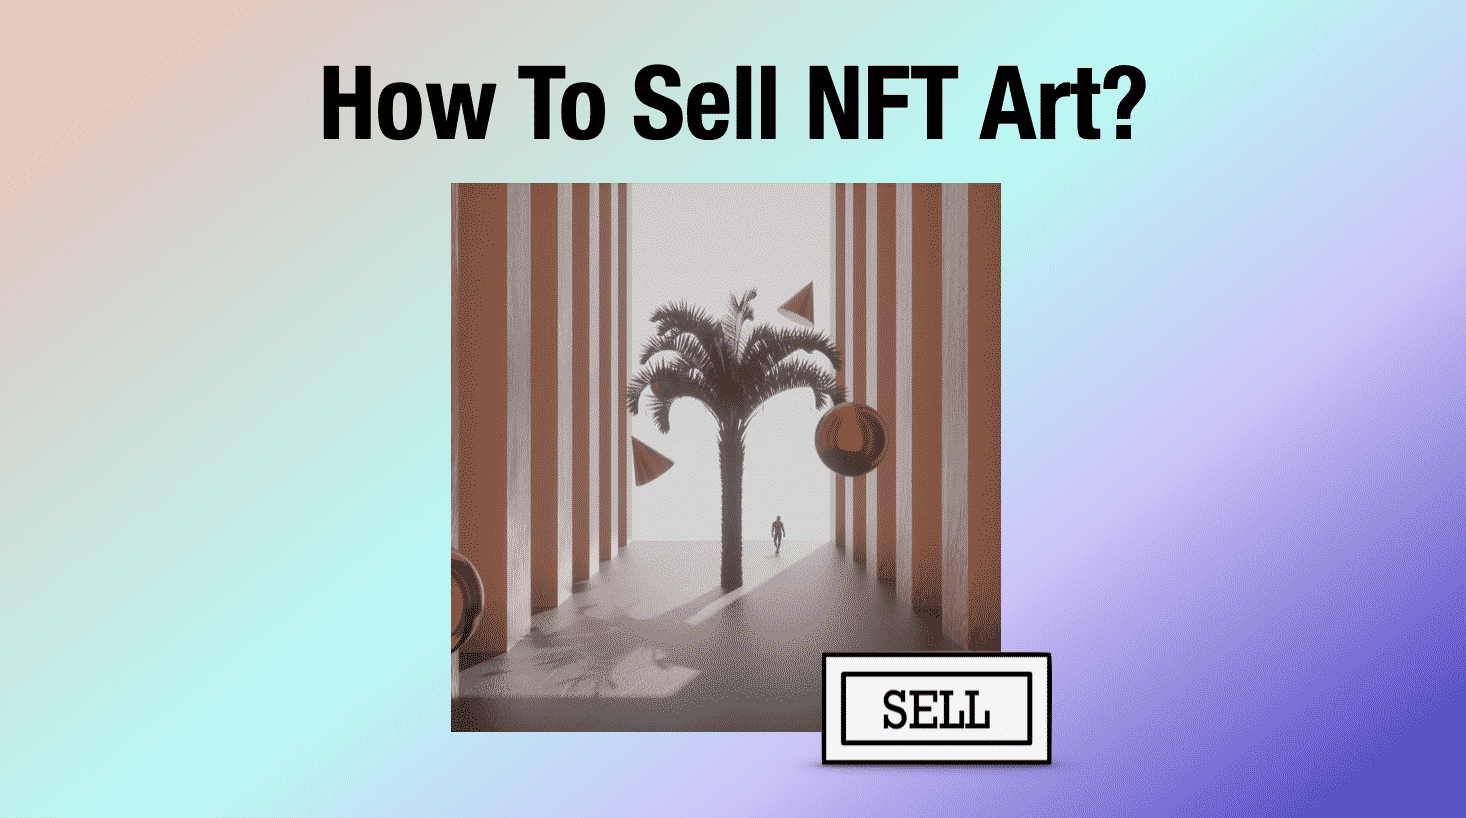 How To Sell NFT Art